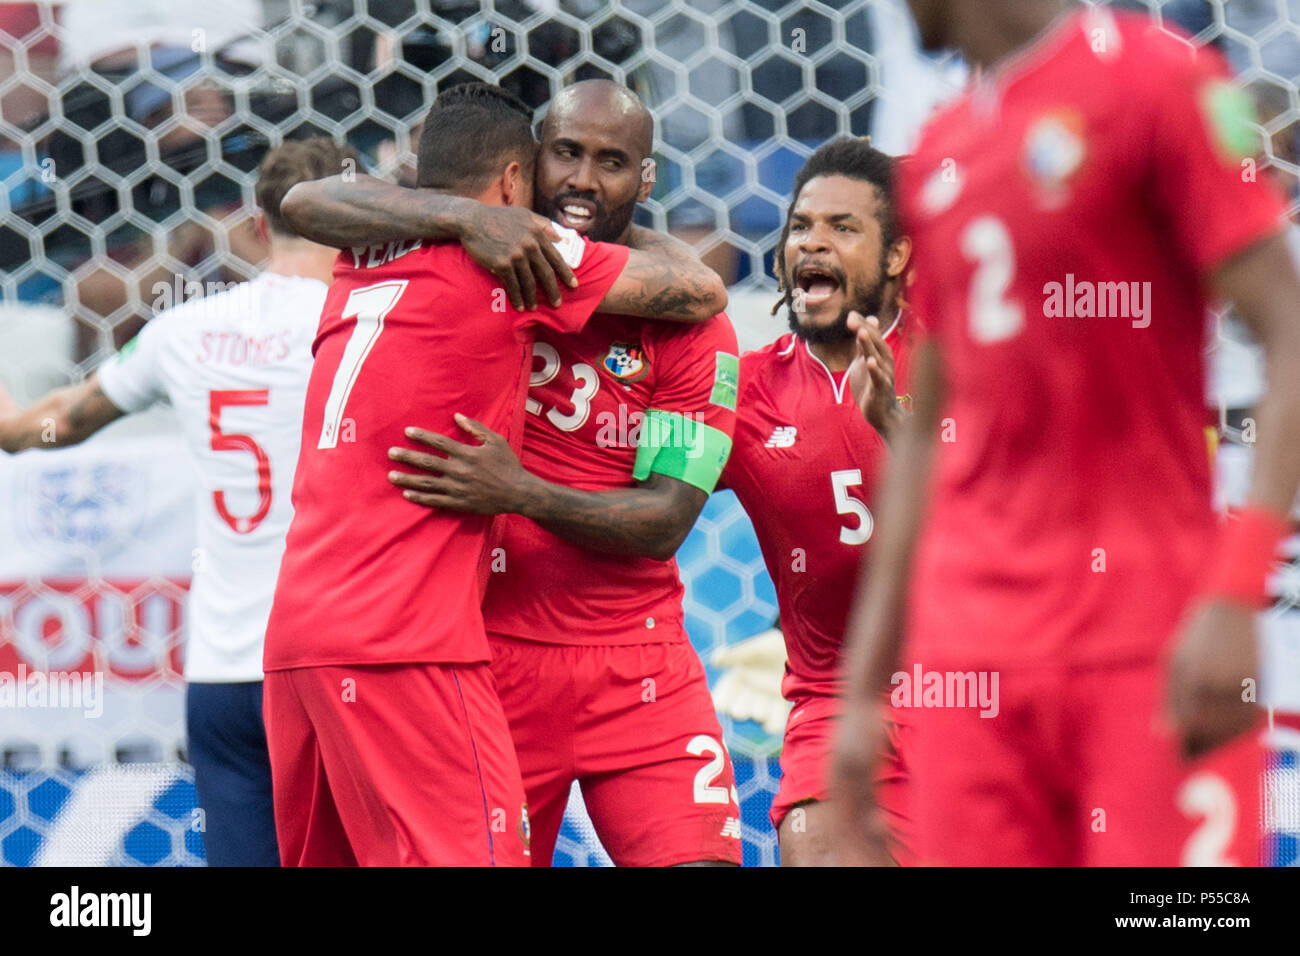 goalkeeper Felipe BALOY (mi., PAN) cheers with Blas PEREZ (left, PAN) and Roman TORRES (PAN) over the only goal for Panama to 6: 1 final score, half figure, half figure, England (ENG) - Panama (PAN ) 6: 1, preliminary round, group G, match 30, on 24.06.2018 in Nizhny Novgorod; Football World Cup 2018 in Russia from 14.06. - 15.07.2018. | usage worldwide Stock Photo